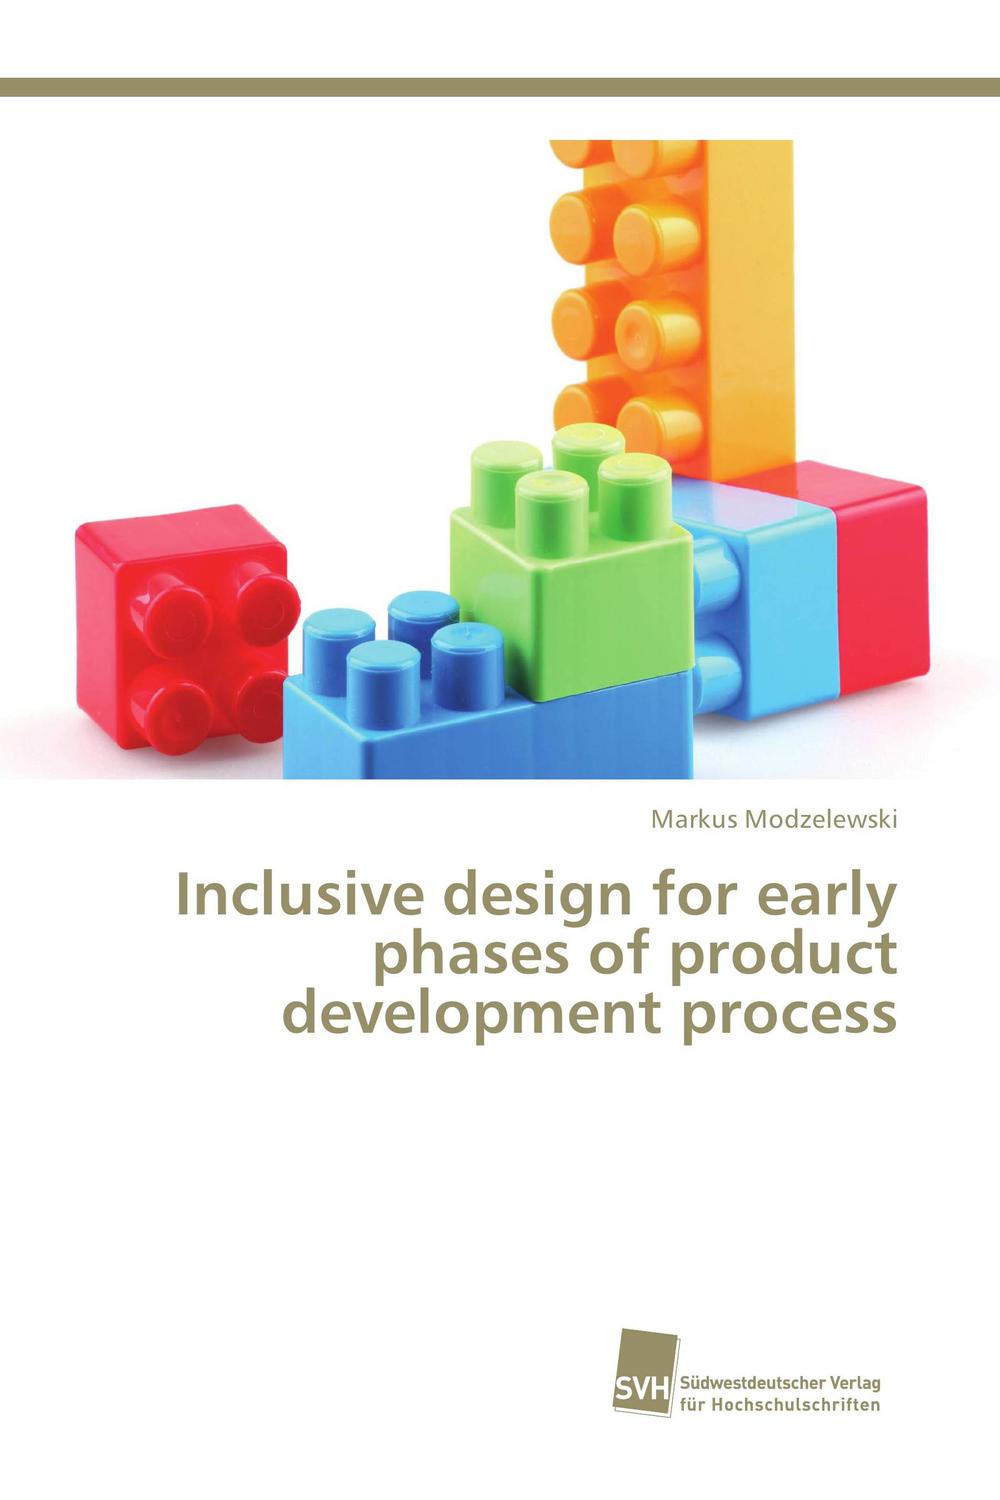 Inclusive design for early phases of product development process - Markus Modzelewski